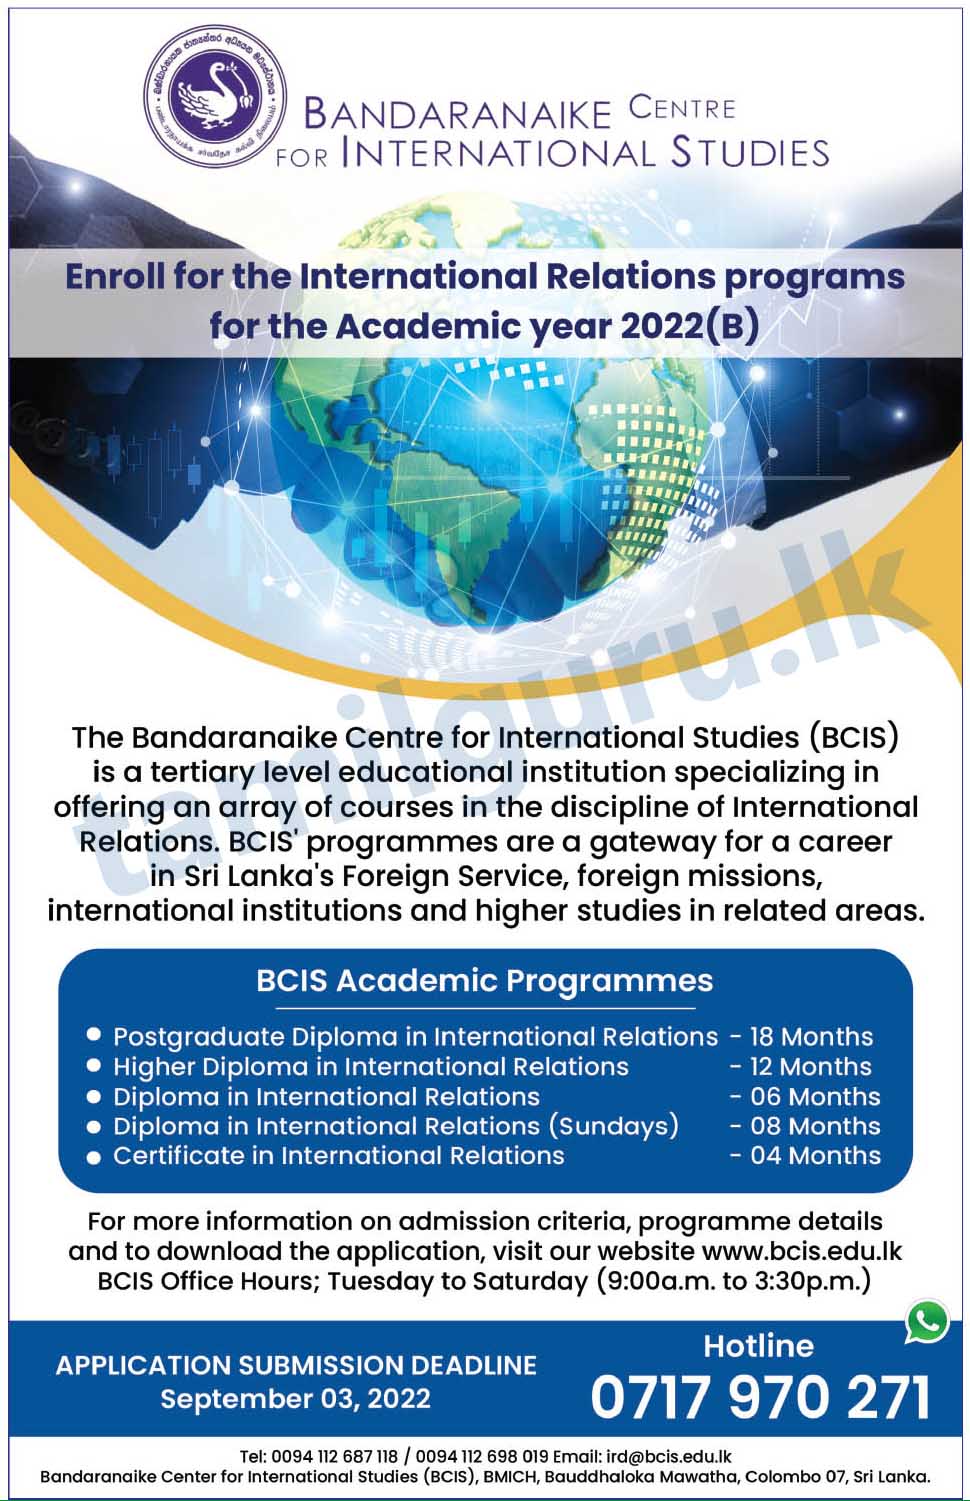 International Relations Courses for Academic Year 2022 (B) - Bandaranaike Centre for International Studies (BCIS)